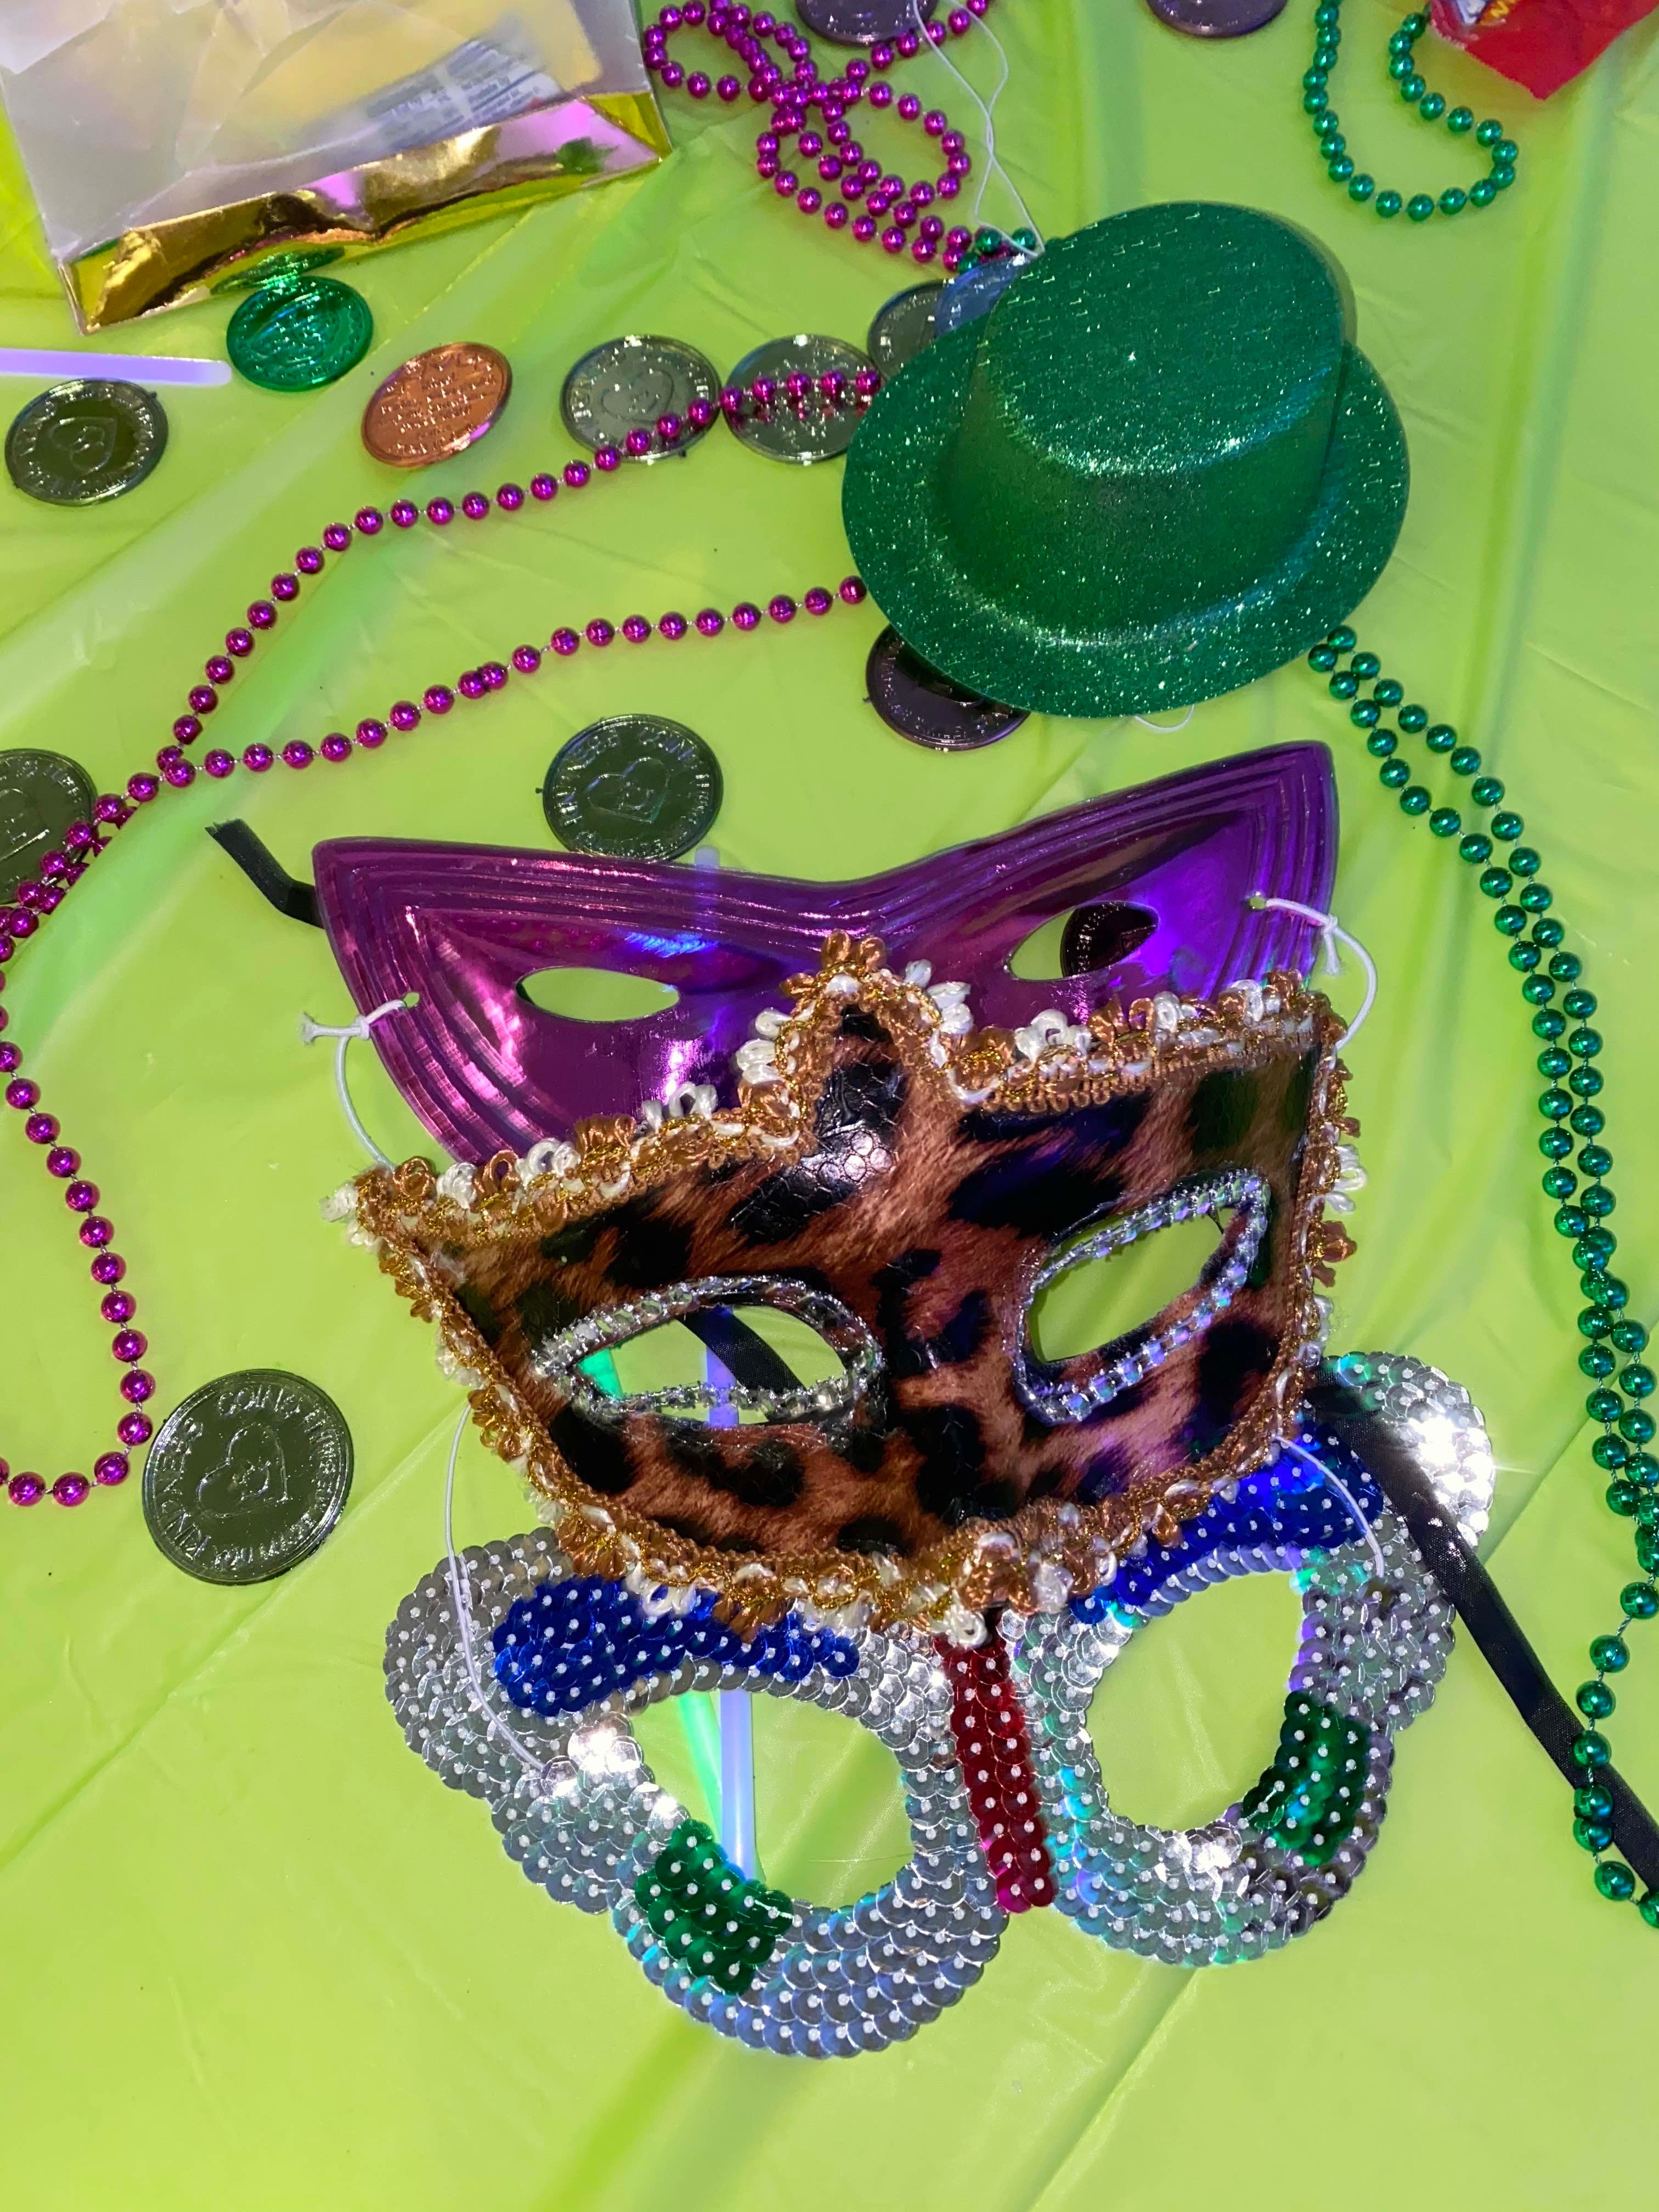 mardi gras masks, beads, coins, and a hat are strewn on a green table